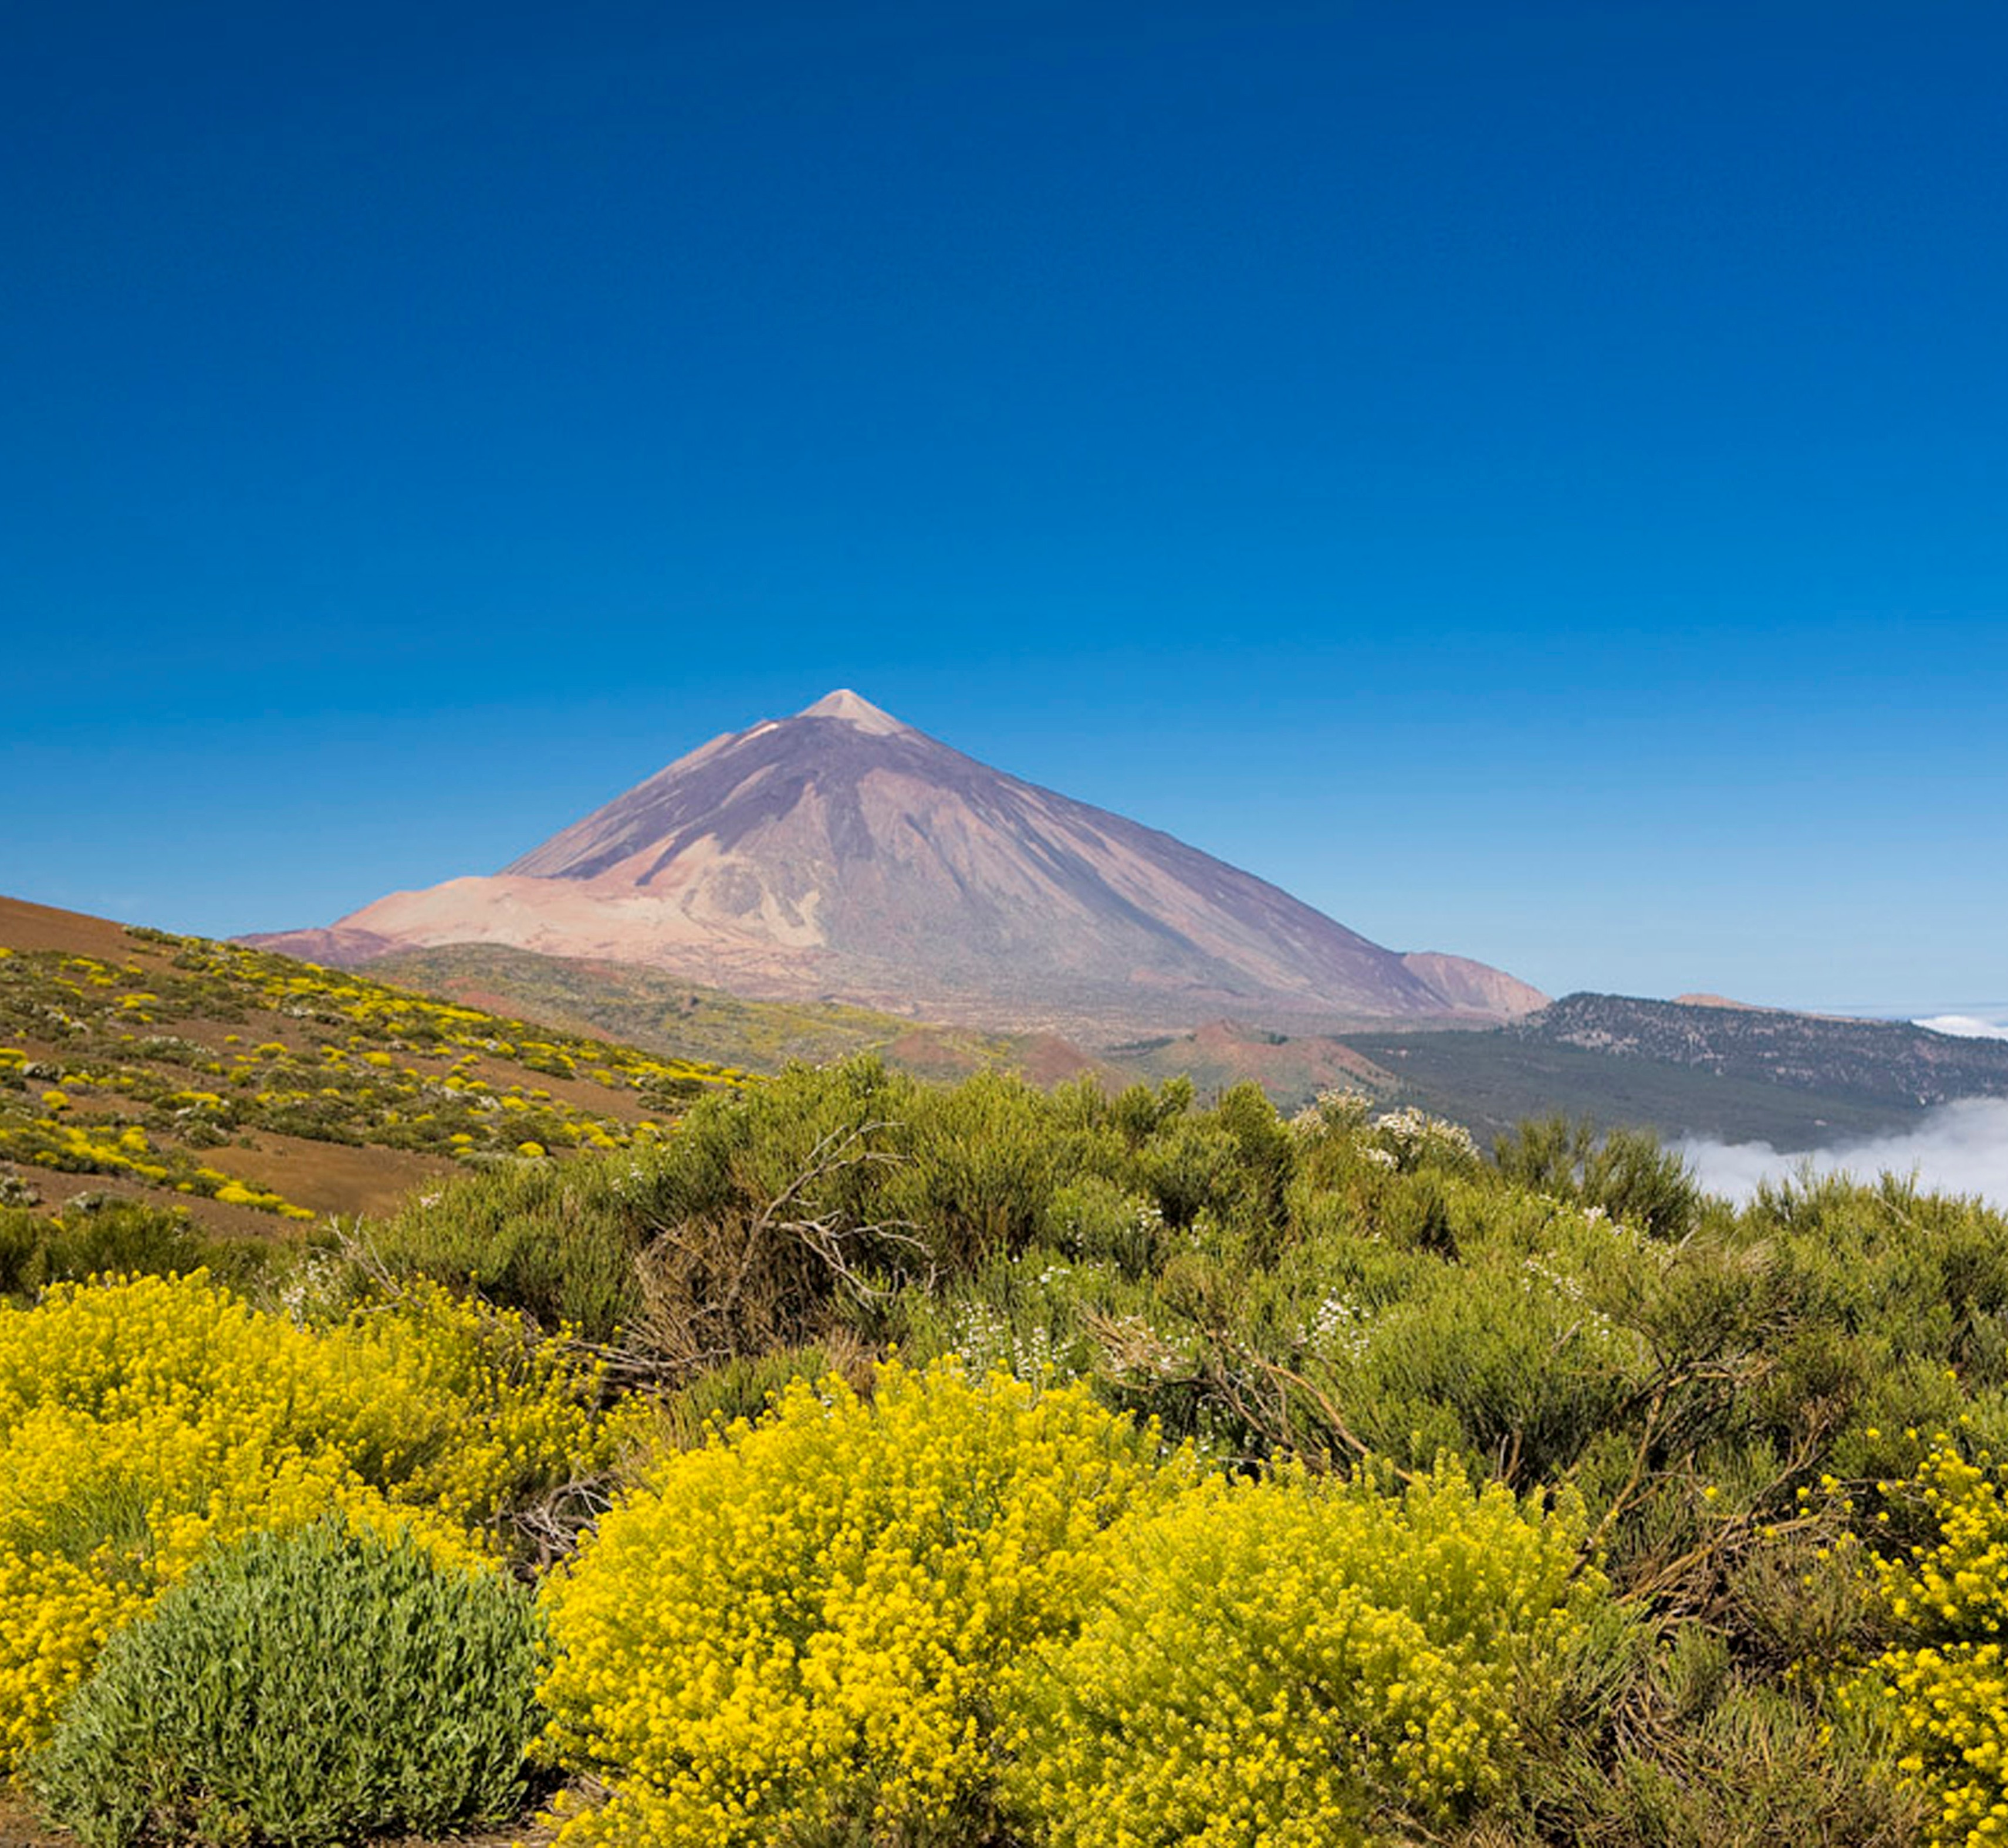 Routes Africa 2016 to be held in Tenerife